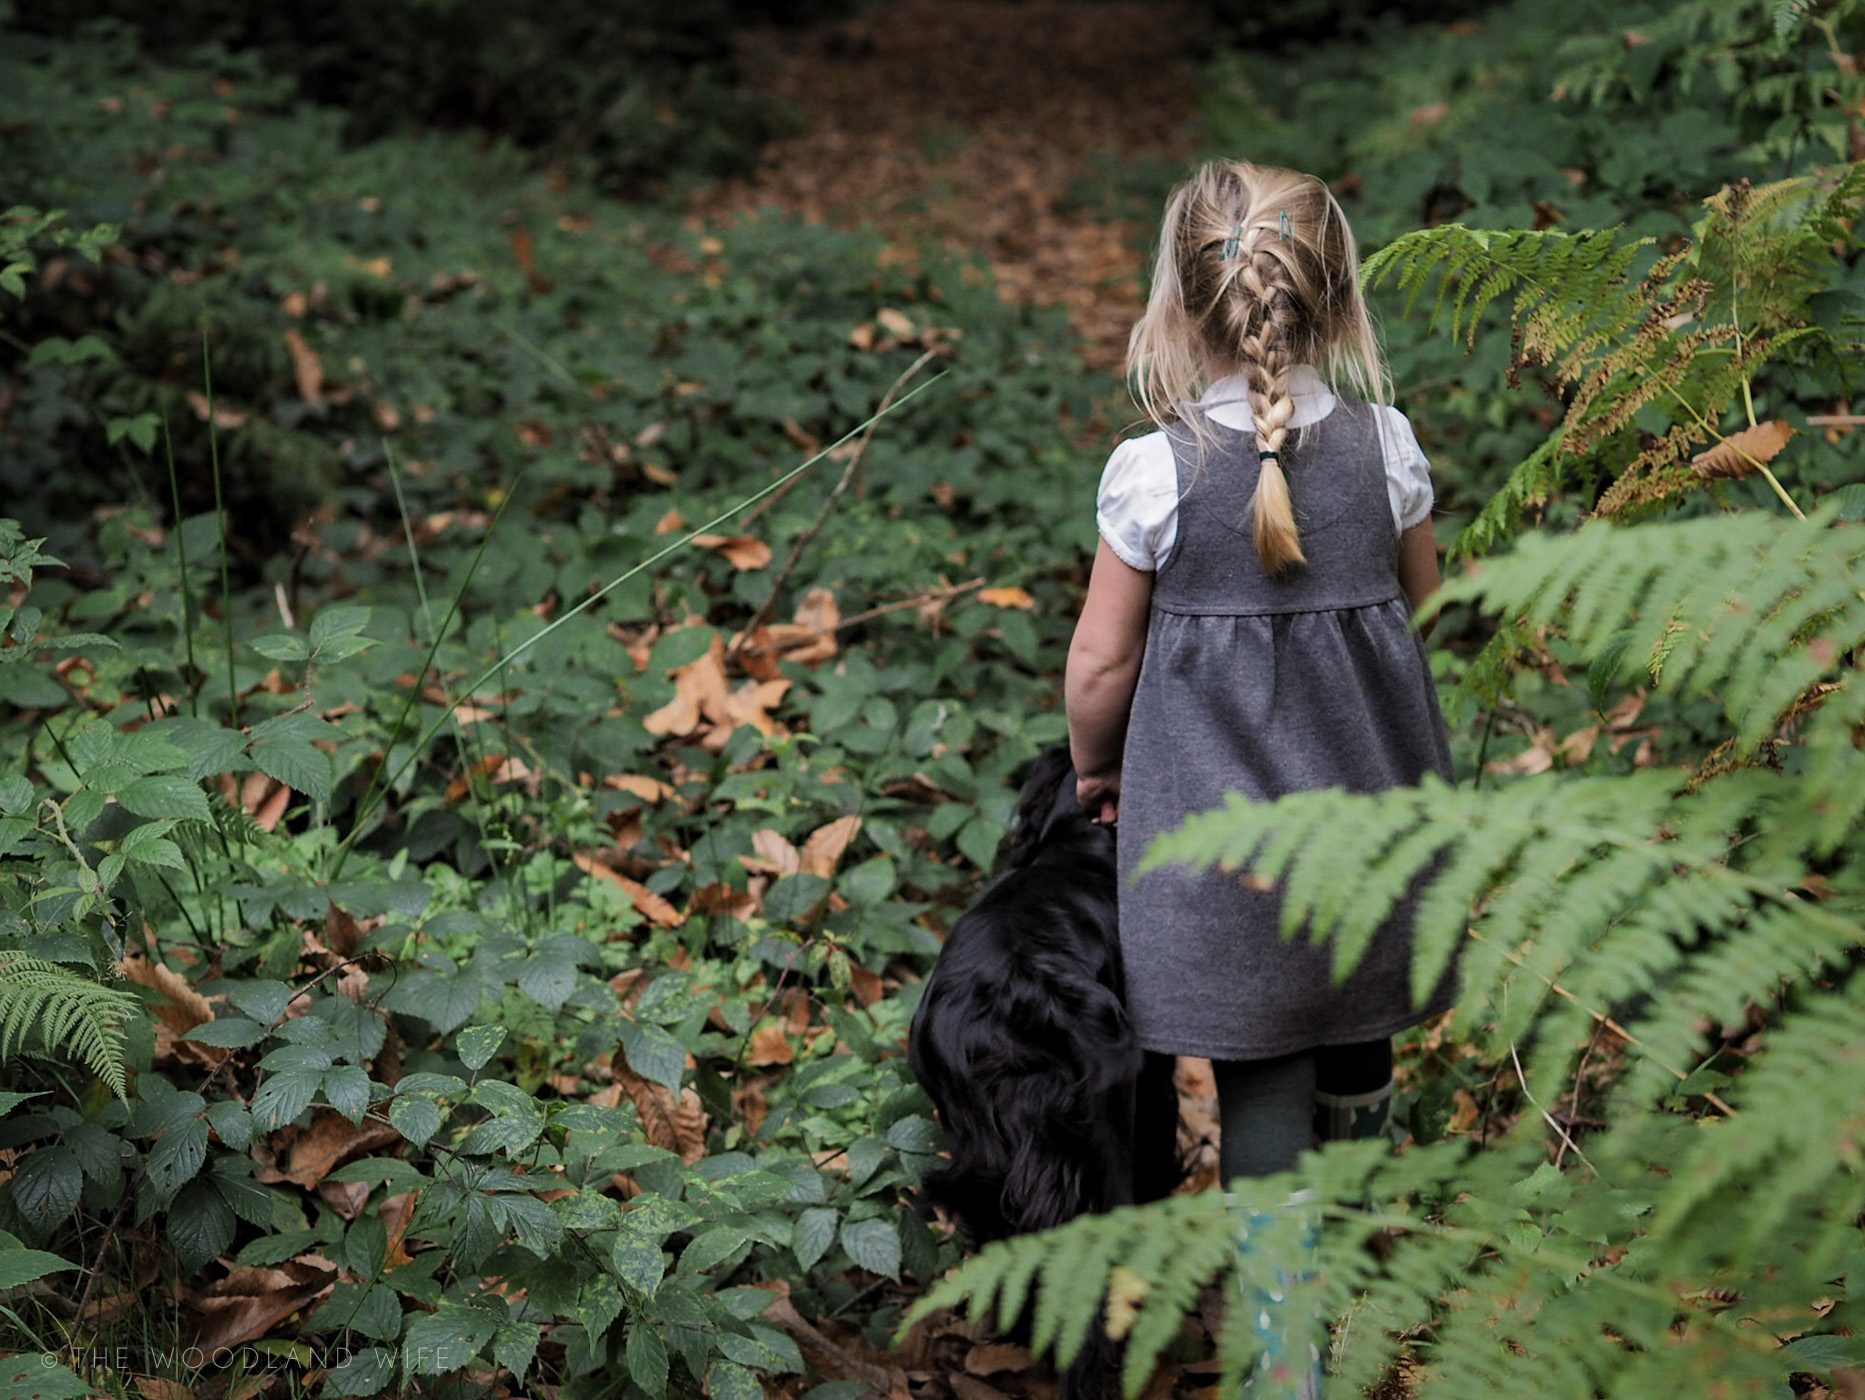 The Woodland Wife - After School Walk in the woods